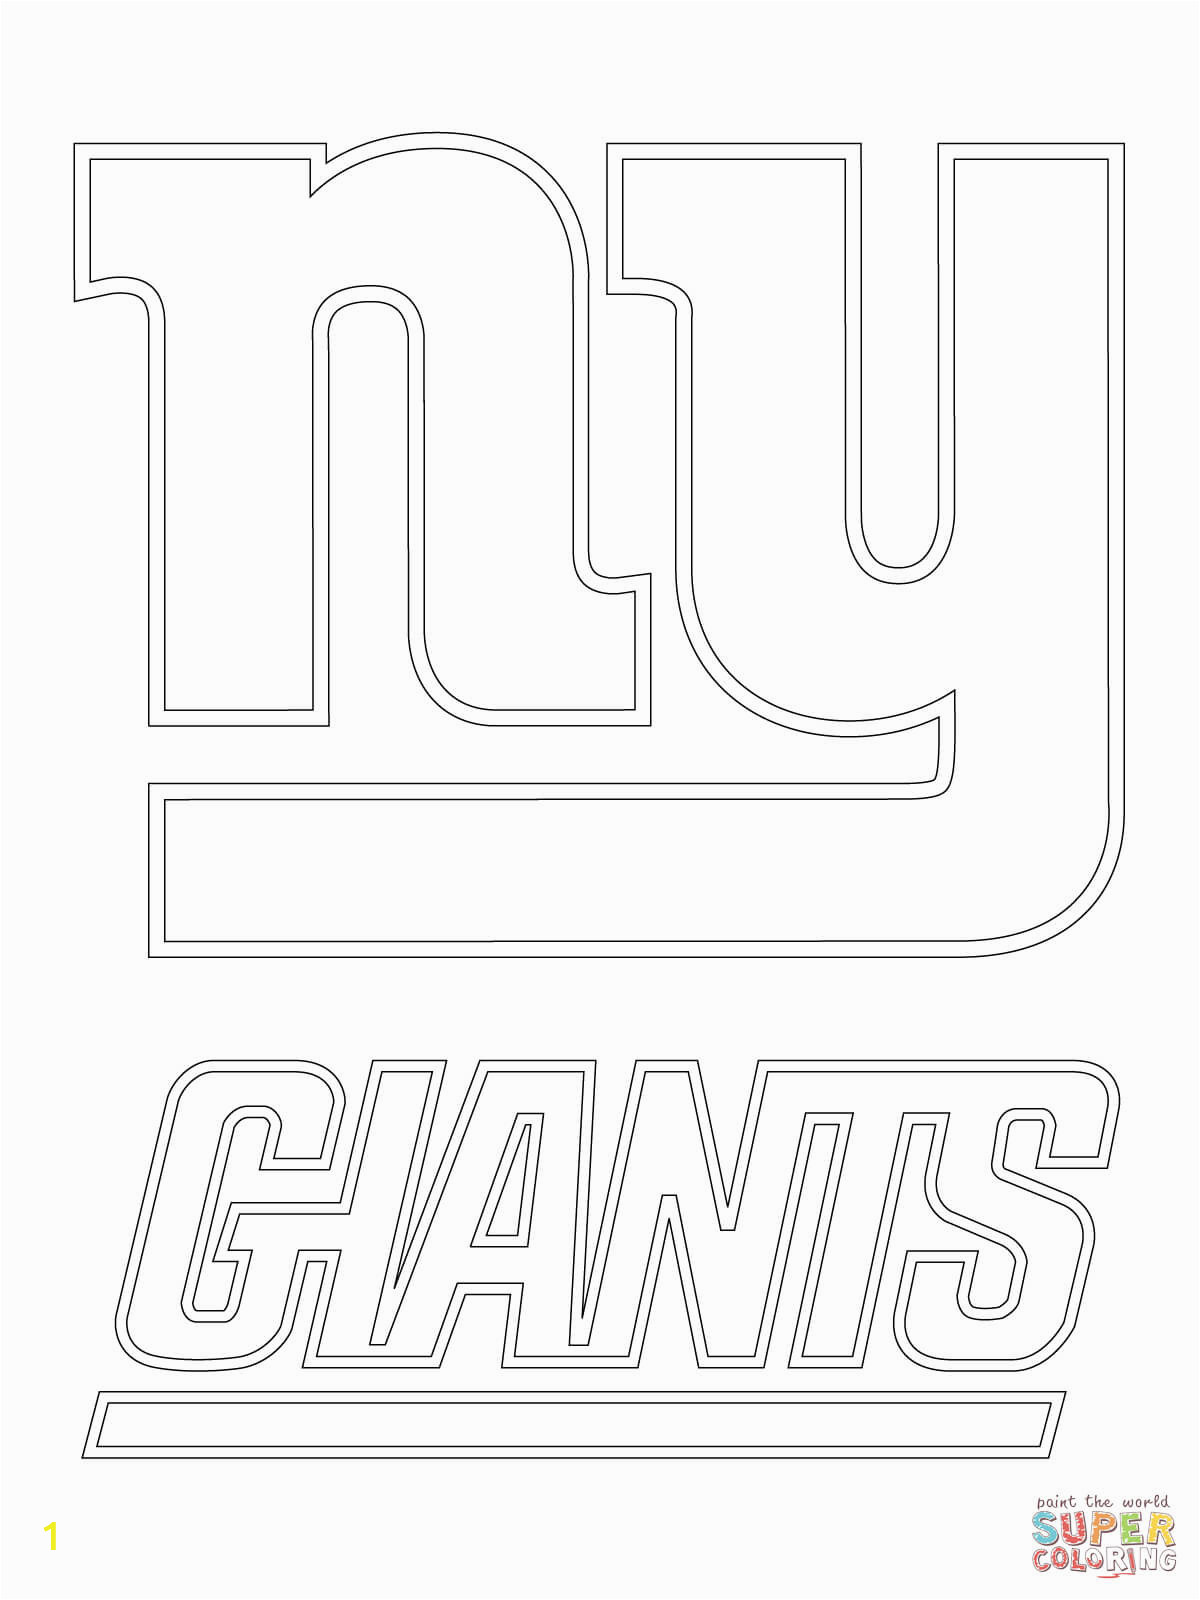 New York Giants Logo Coloring Page New York Giants Logo Coloring Page